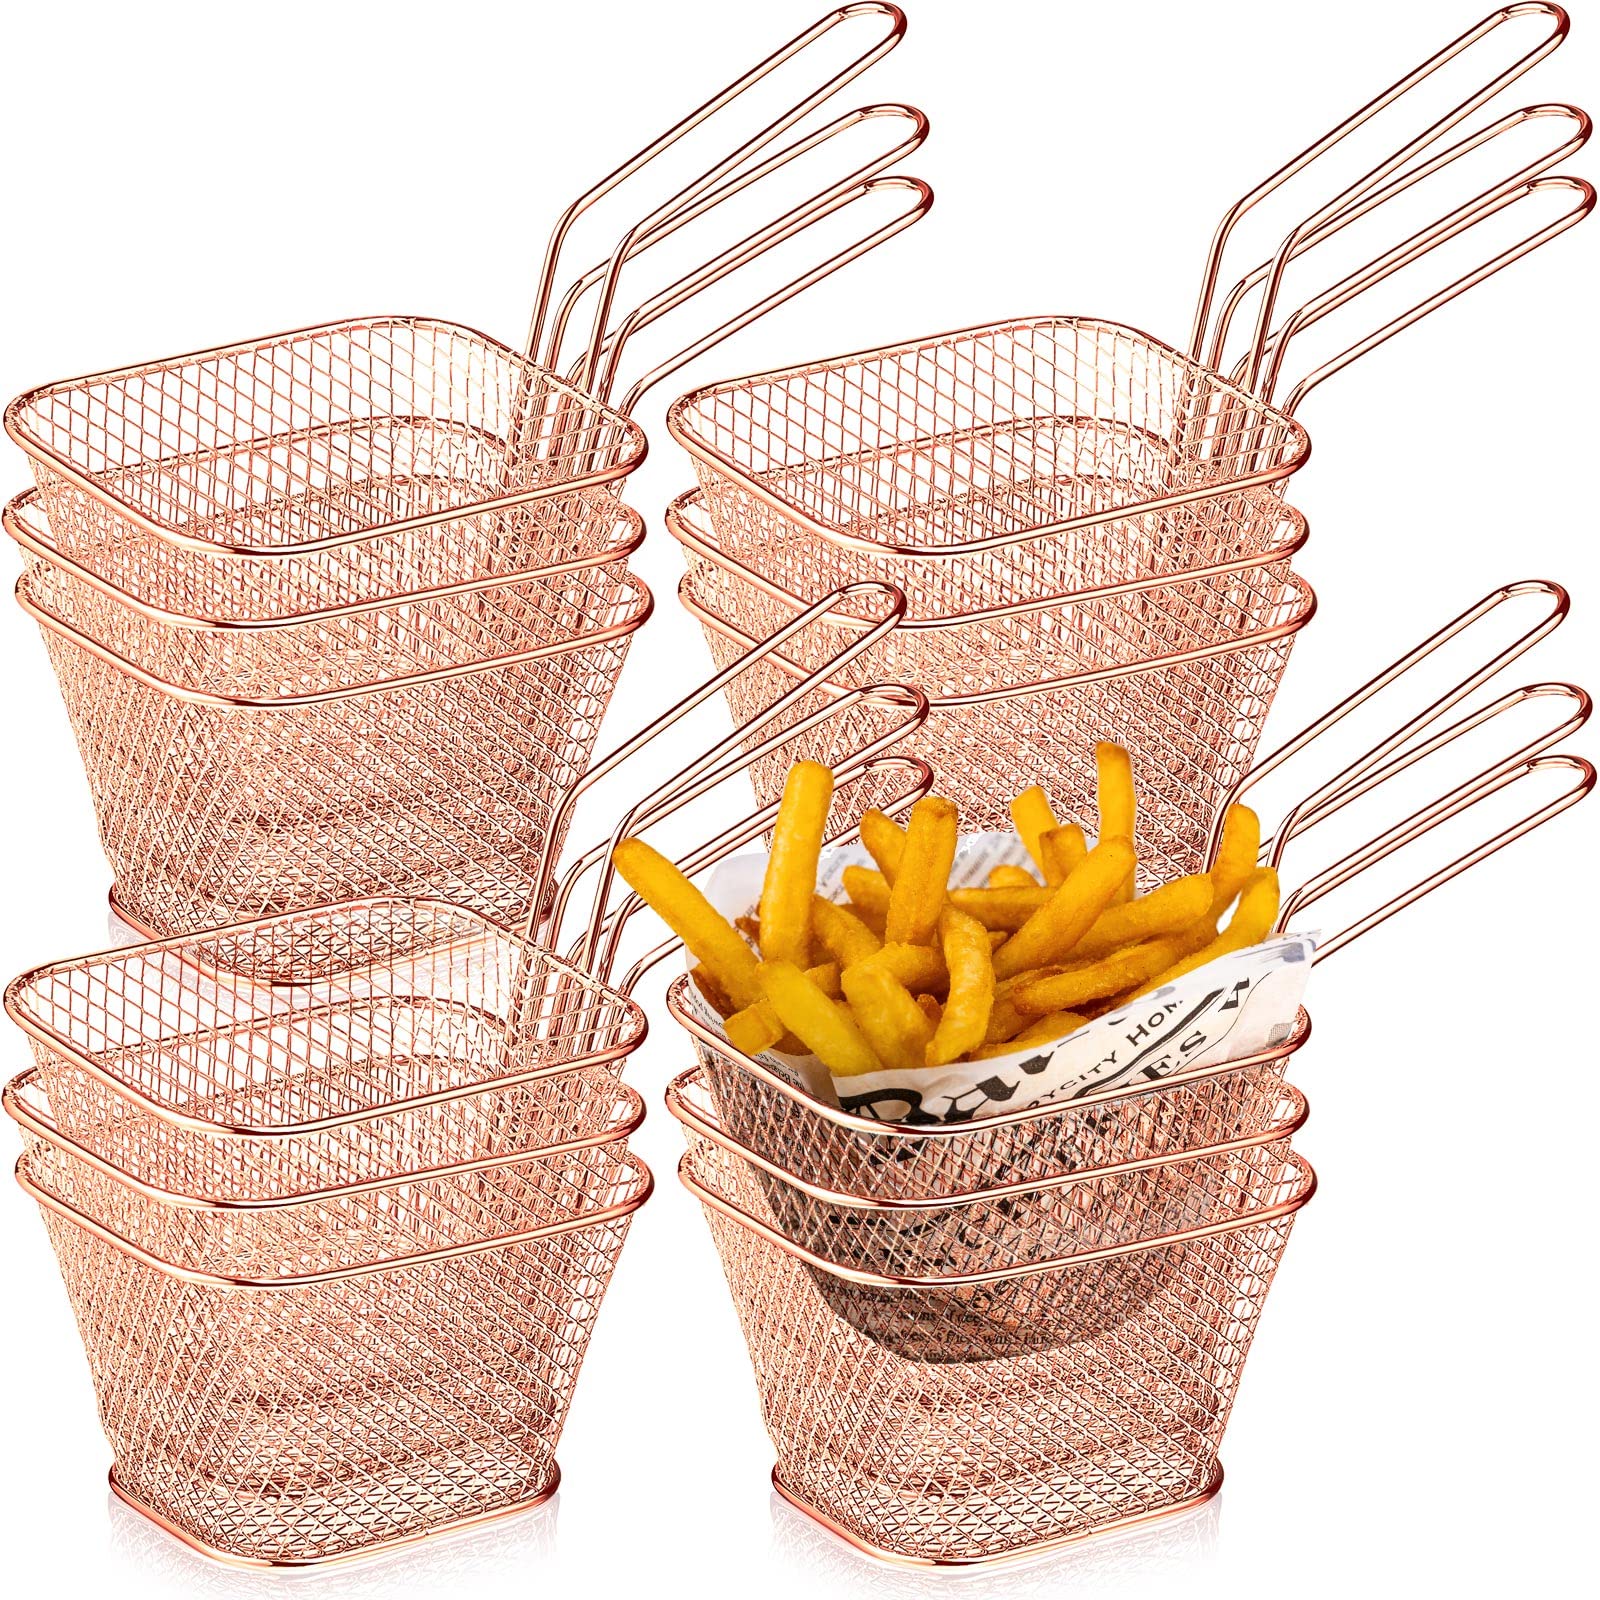 Sieral 12 Pieces Mini Square Fry Basket Steel French Chip Food Baskets for Serving Stainless with Handle Reusable Fries Holder Deep Fryer Home(Rose Gold), 10.5 x 8.5 x 6.3 cm/ 4.1 x 3.3 x 2.5 inches